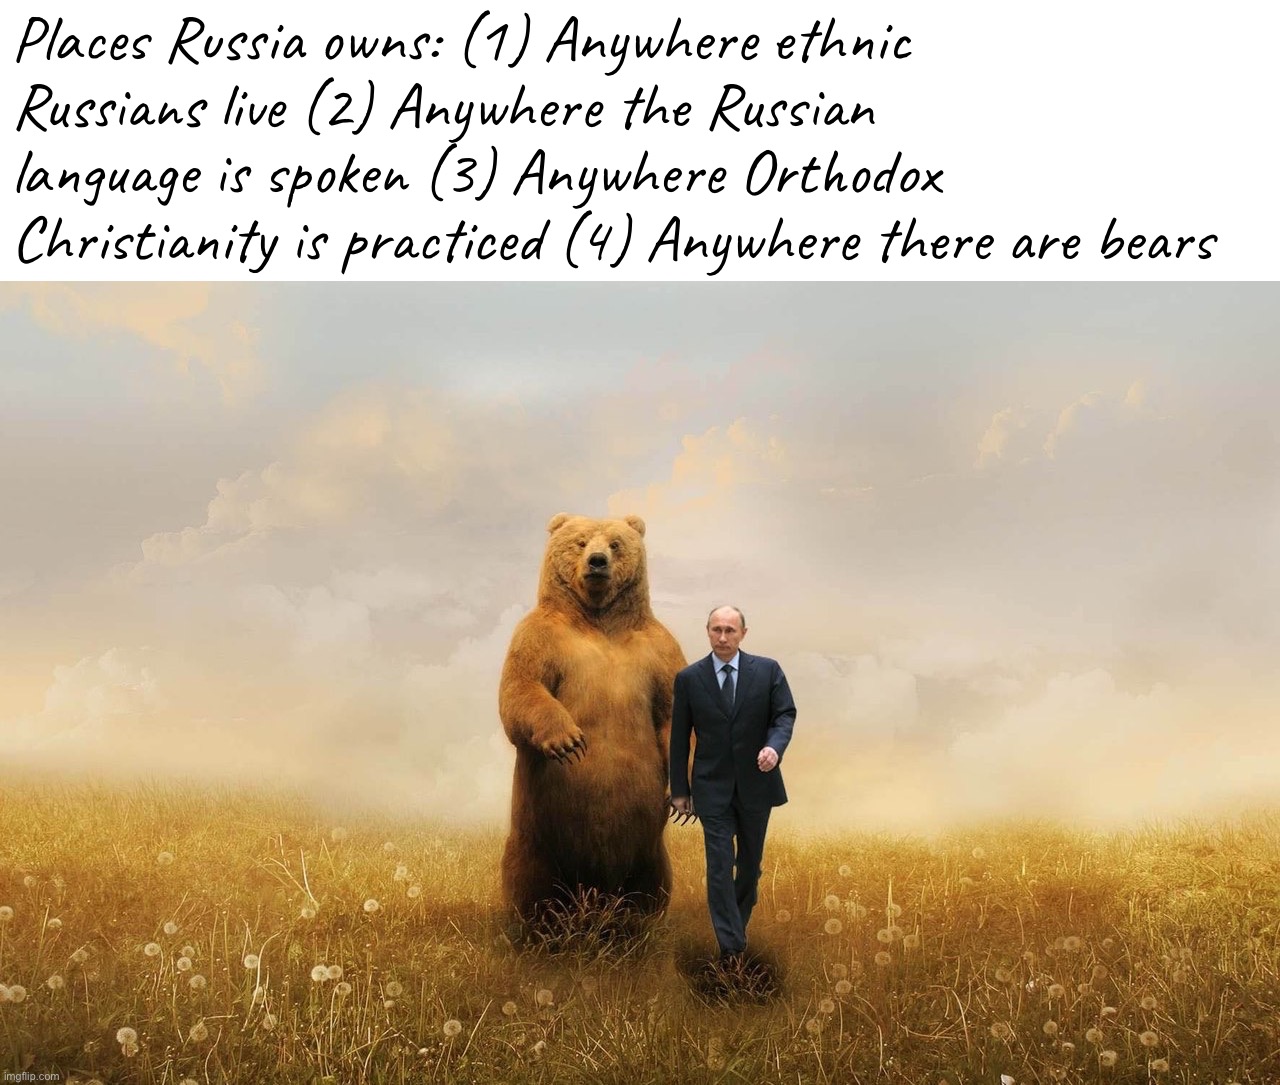 The Russian world: defined | Places Russia owns: (1) Anywhere ethnic Russians live (2) Anywhere the Russian language is spoken (3) Anywhere Orthodox Christianity is practiced (4) Anywhere there are bears | image tagged in birthday bear putin,putin,vladimir putin,russia,imperialism,bears | made w/ Imgflip meme maker